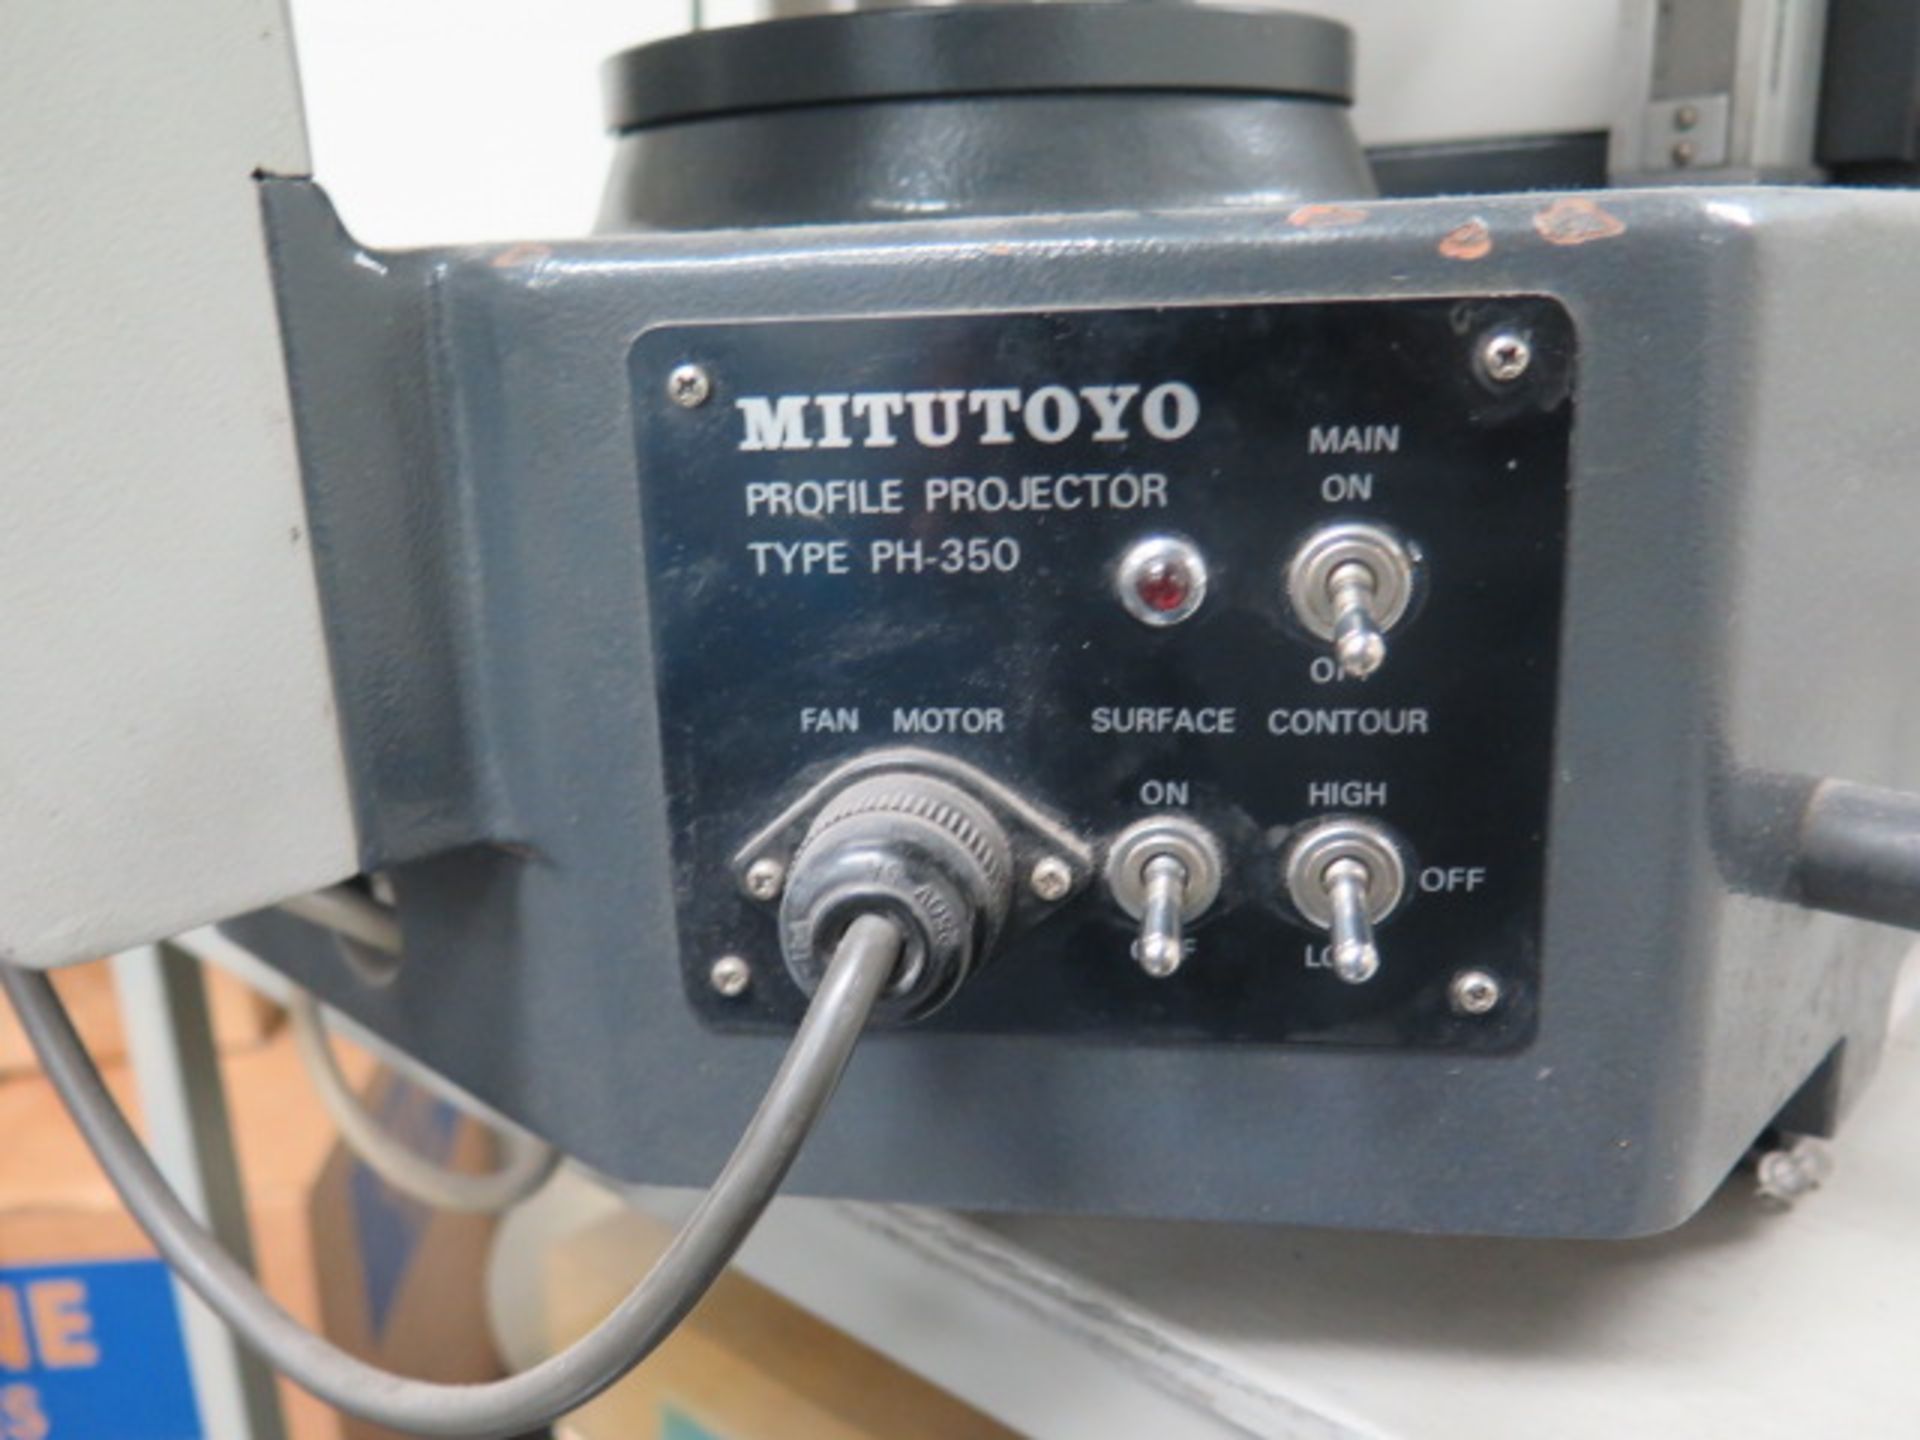 Mitutoyo PH-350 13" Optical Comparator s/n 362 w/ Mitutoyo DRO's, 20X and 50X Lenses, SOLD AS IS - Image 9 of 12